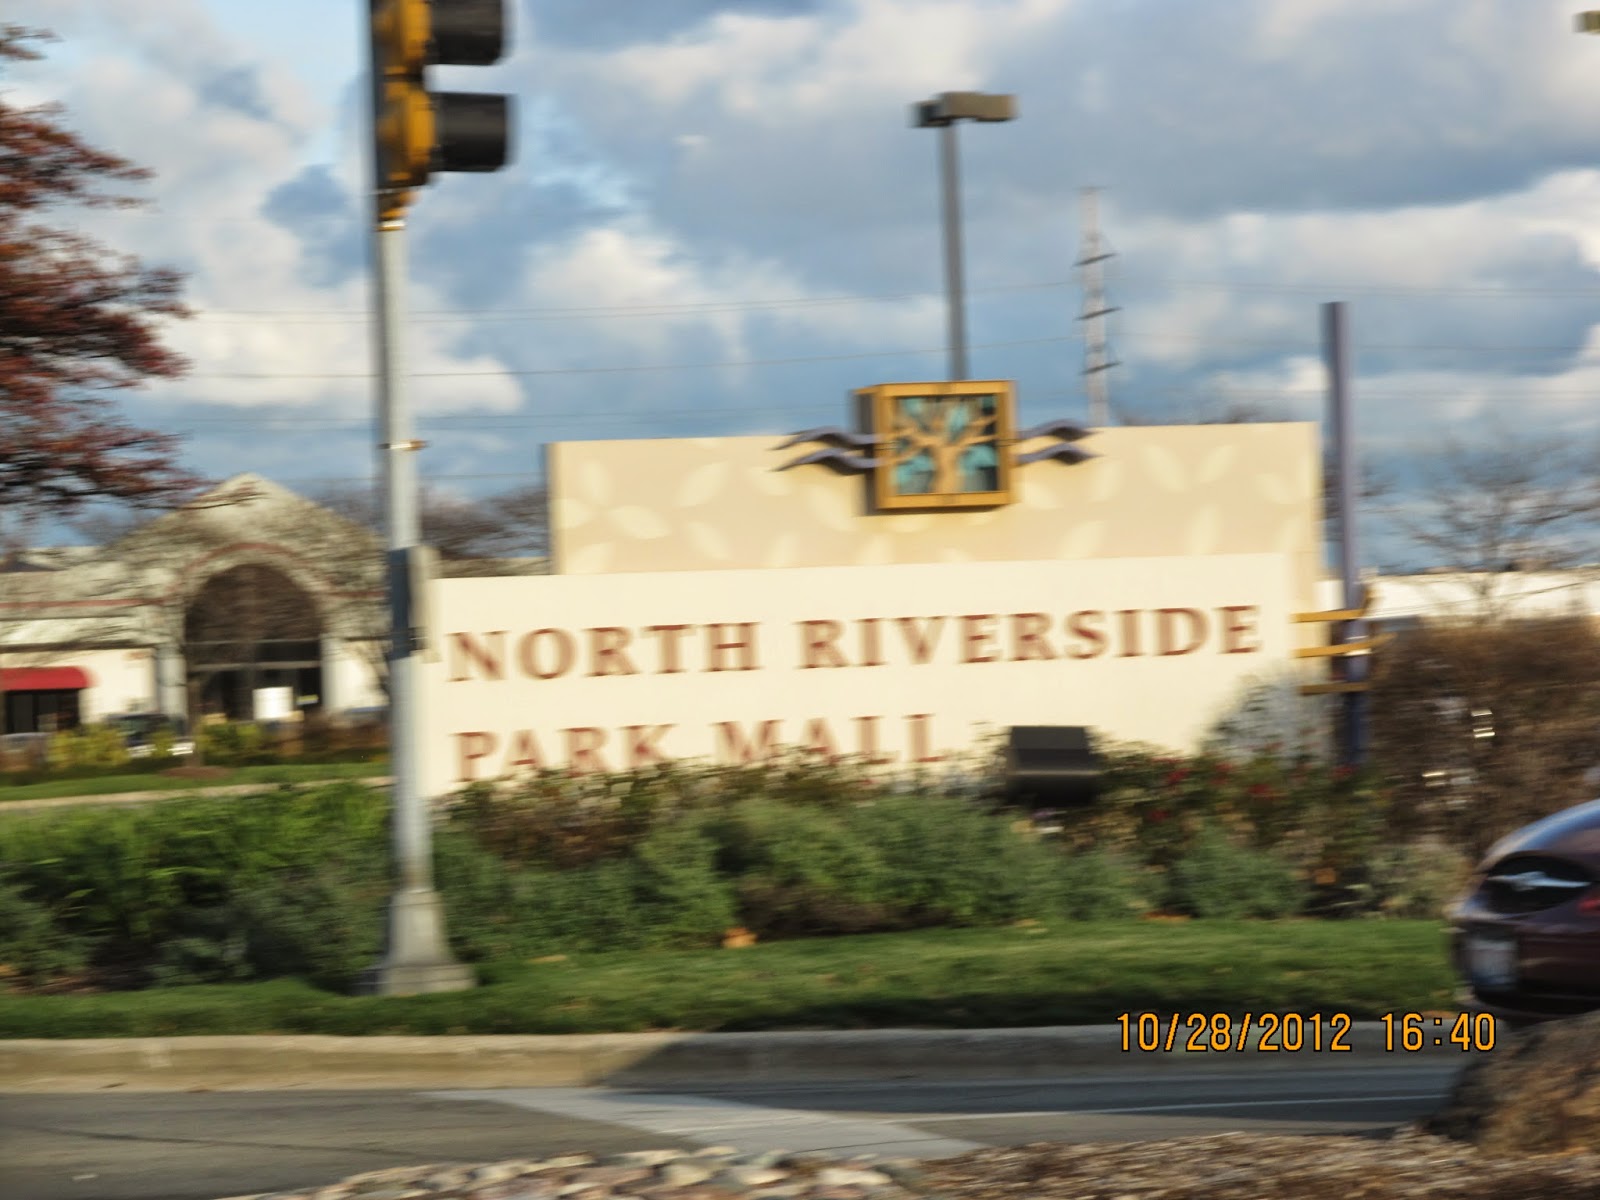 Directory Map — North Riverside Park Mall